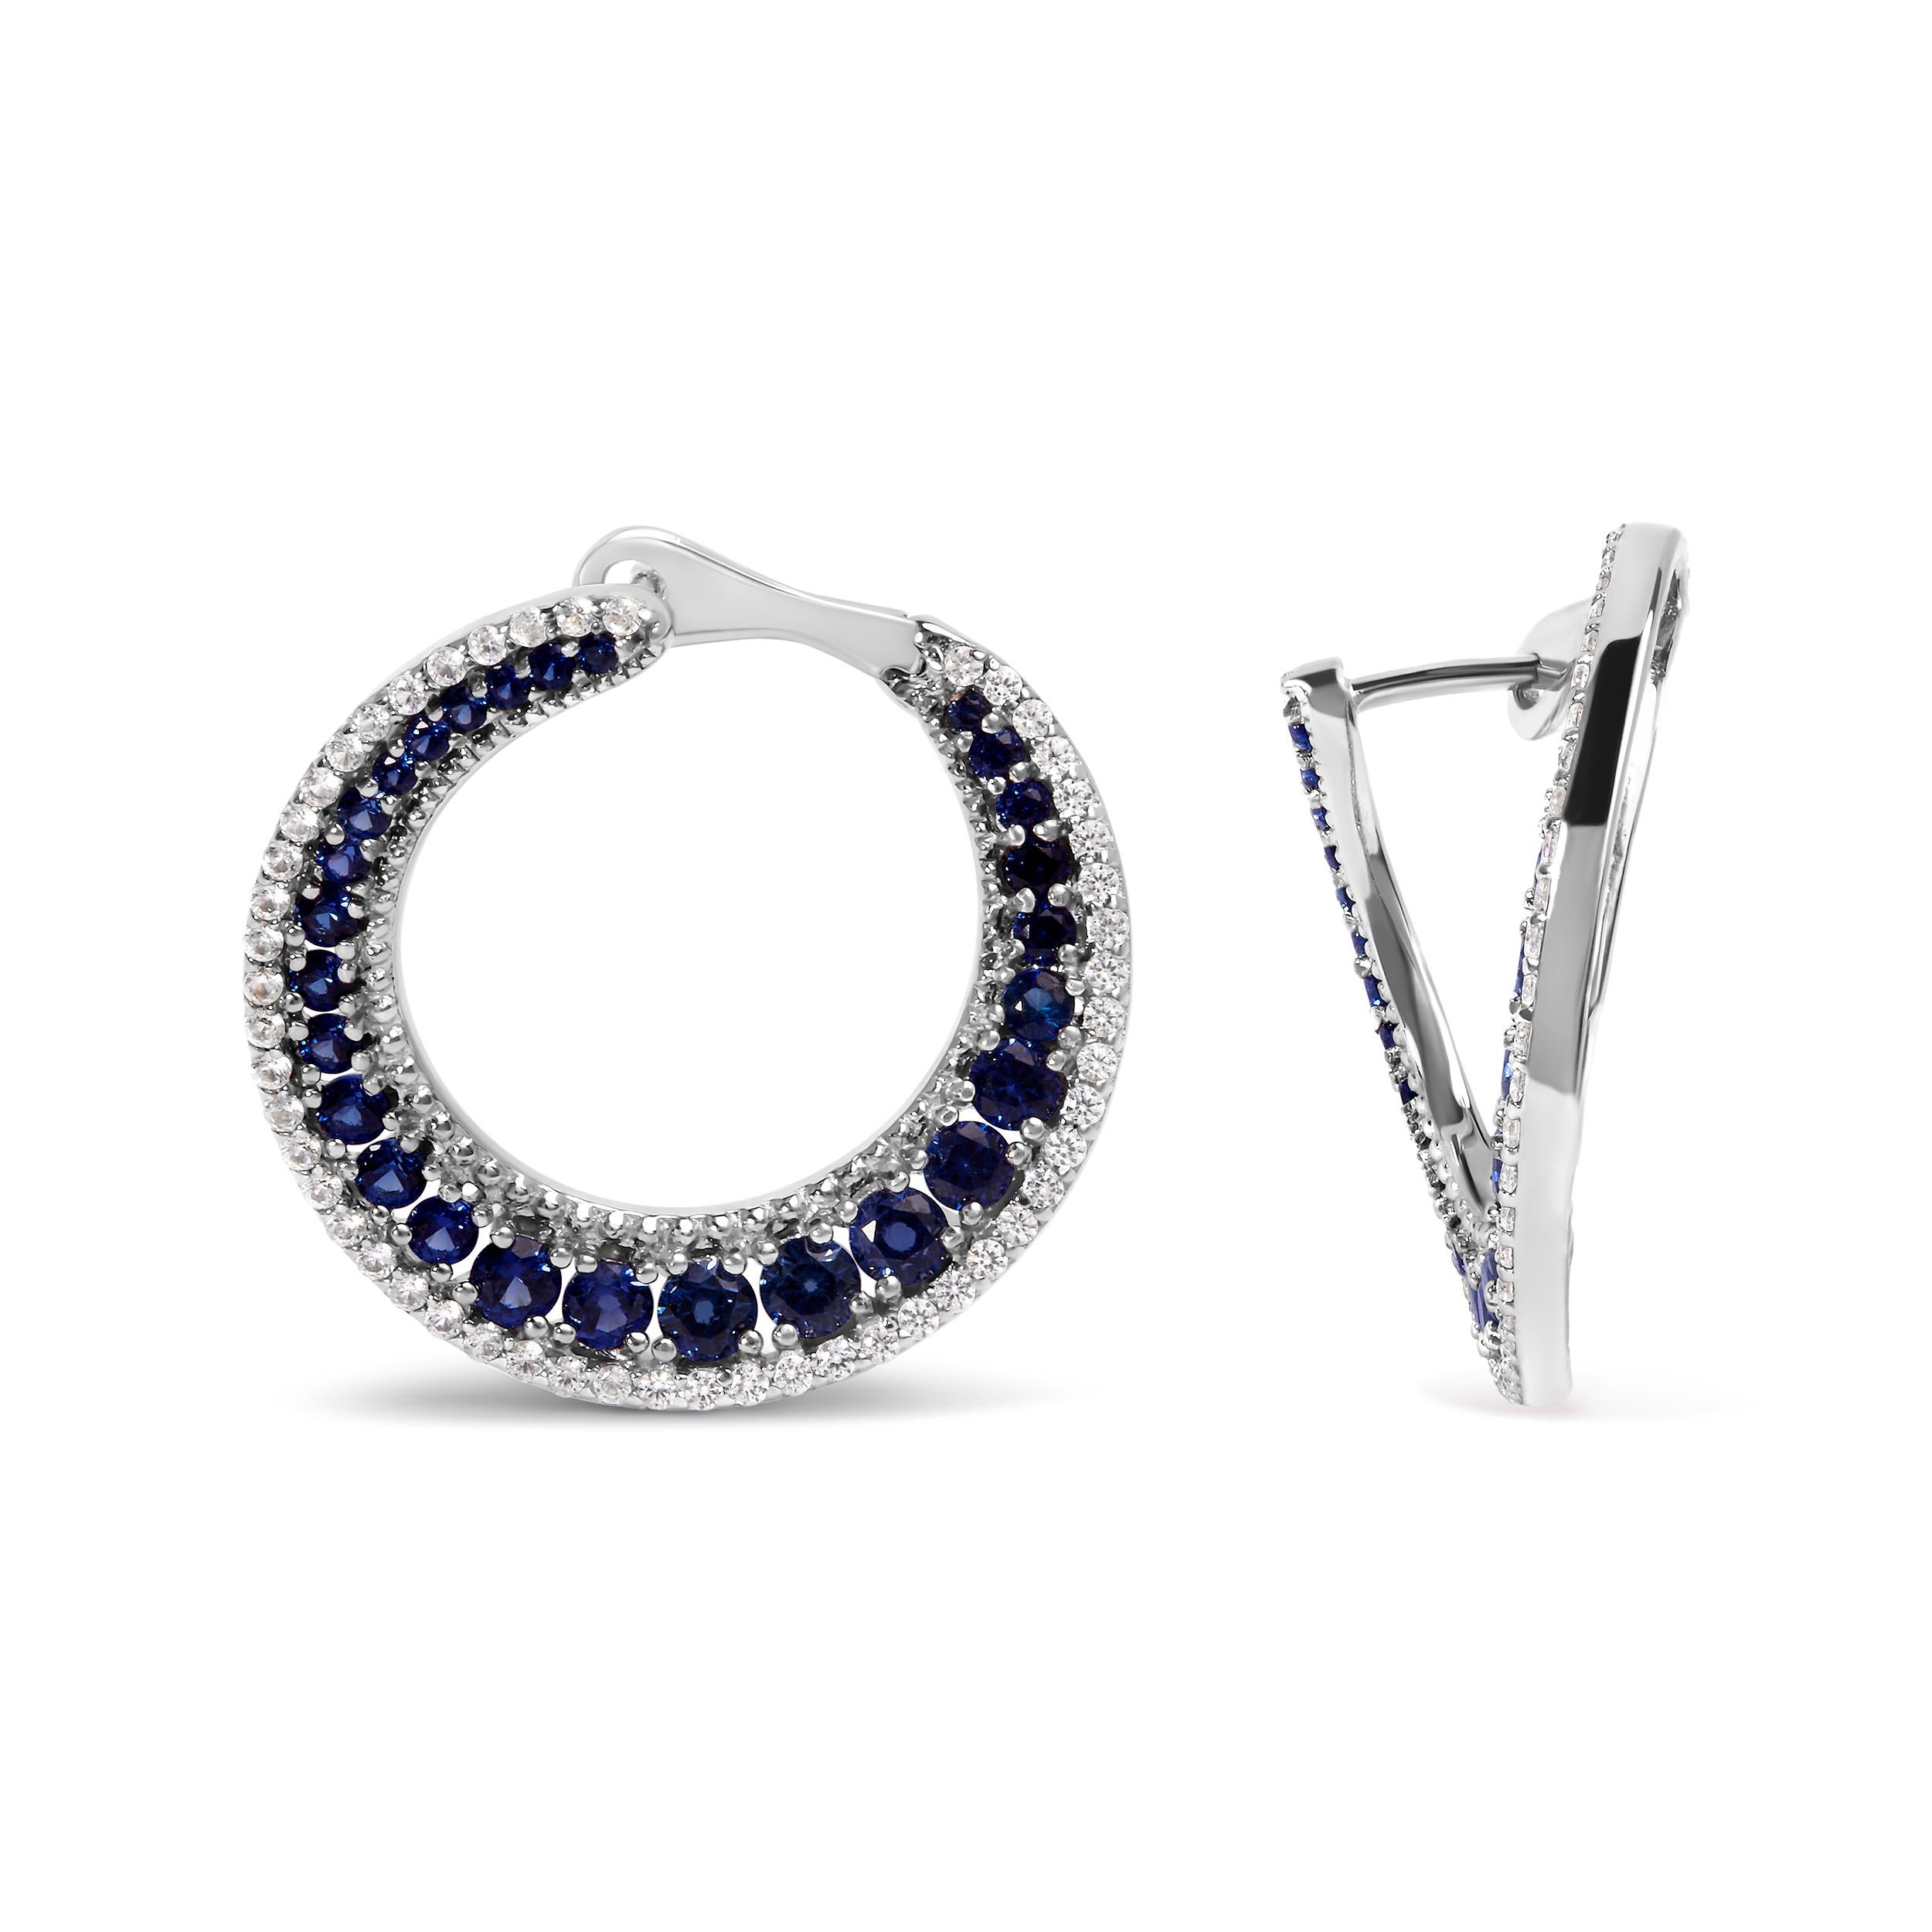 Contemporary Sterling Silver 2 3/4 Carat Blue Sapphire Crescent Moon Disc Style Hoop Earrings For Sale